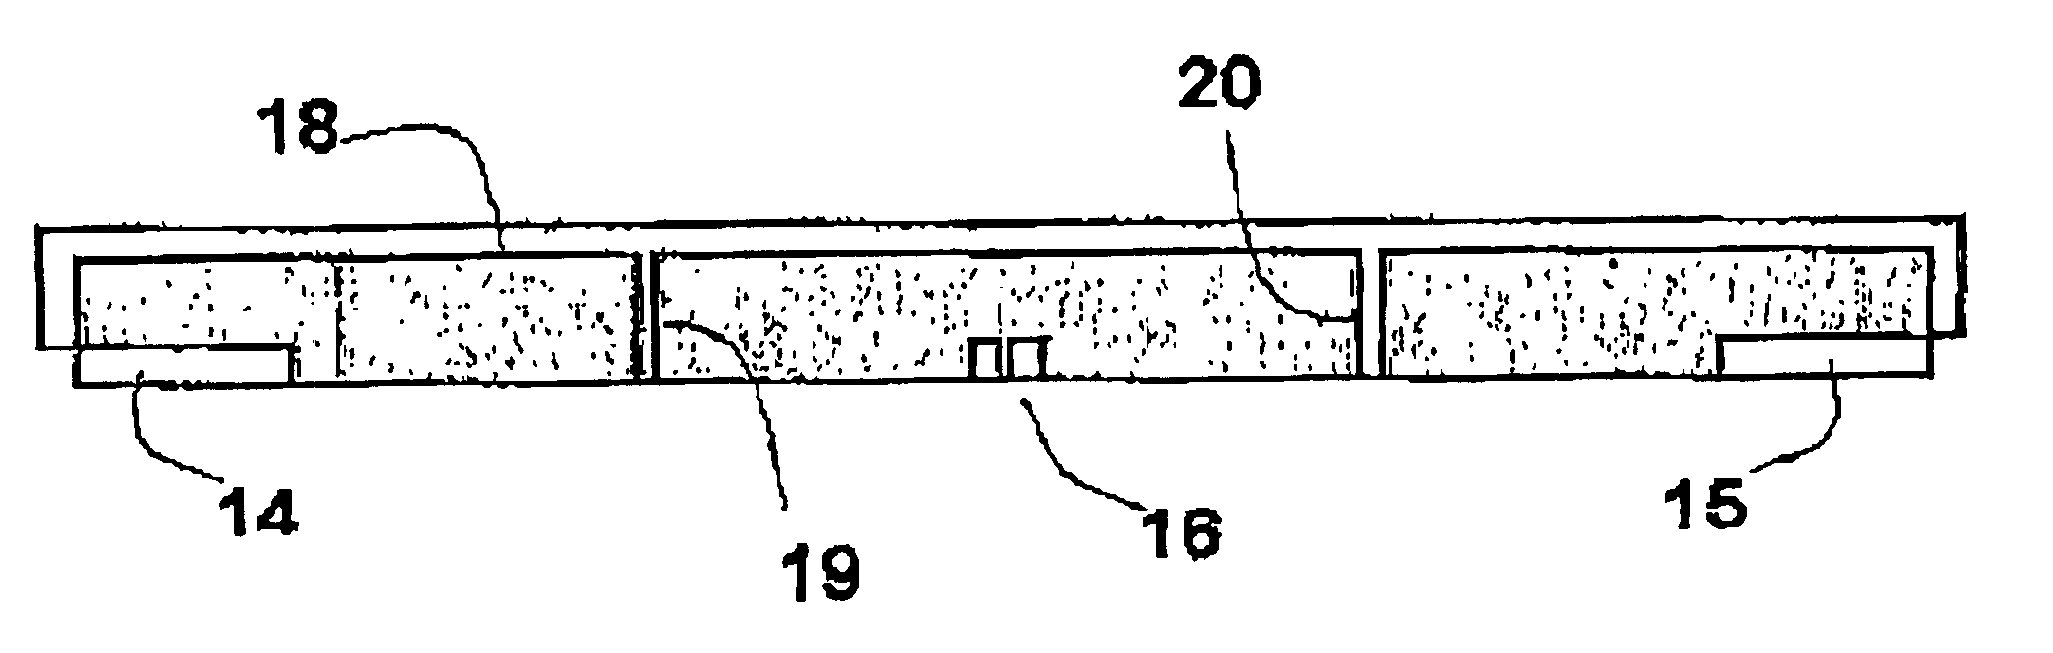 Conductive pad around electrodes for investigating the wall of a borehole in a geological formation